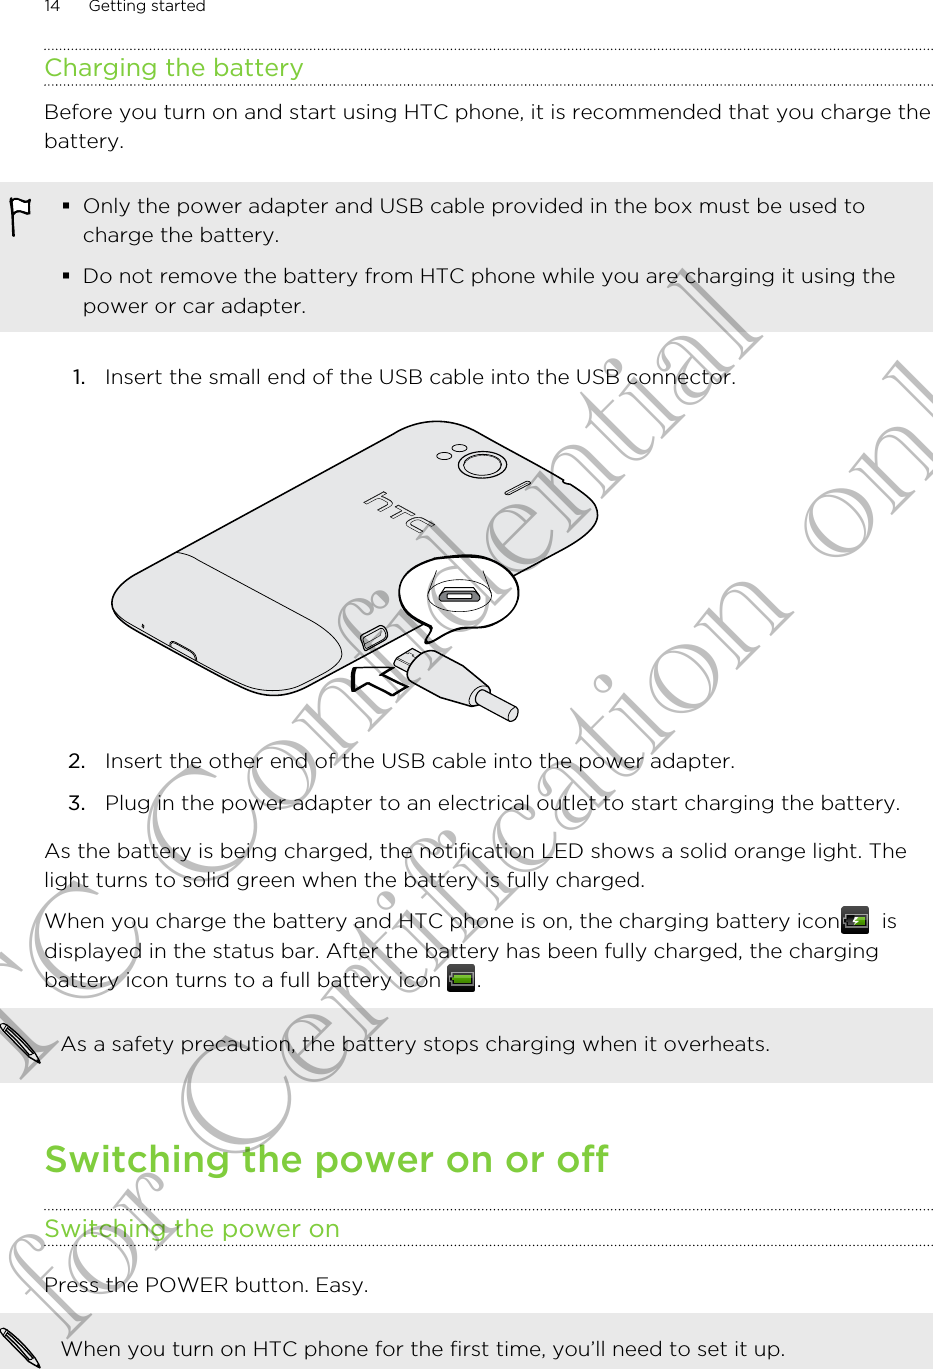 Charging the batteryBefore you turn on and start using HTC phone, it is recommended that you charge thebattery.§Only the power adapter and USB cable provided in the box must be used tocharge the battery.§Do not remove the battery from HTC phone while you are charging it using thepower or car adapter.1. Insert the small end of the USB cable into the USB connector. 2. Insert the other end of the USB cable into the power adapter.3. Plug in the power adapter to an electrical outlet to start charging the battery.As the battery is being charged, the notification LED shows a solid orange light. Thelight turns to solid green when the battery is fully charged.When you charge the battery and HTC phone is on, the charging battery icon   isdisplayed in the status bar. After the battery has been fully charged, the chargingbattery icon turns to a full battery icon  .As a safety precaution, the battery stops charging when it overheats.Switching the power on or offSwitching the power onPress the POWER button. Easy. When you turn on HTC phone for the first time, you’ll need to set it up.14 Getting startedHTC Confidential for Certification only